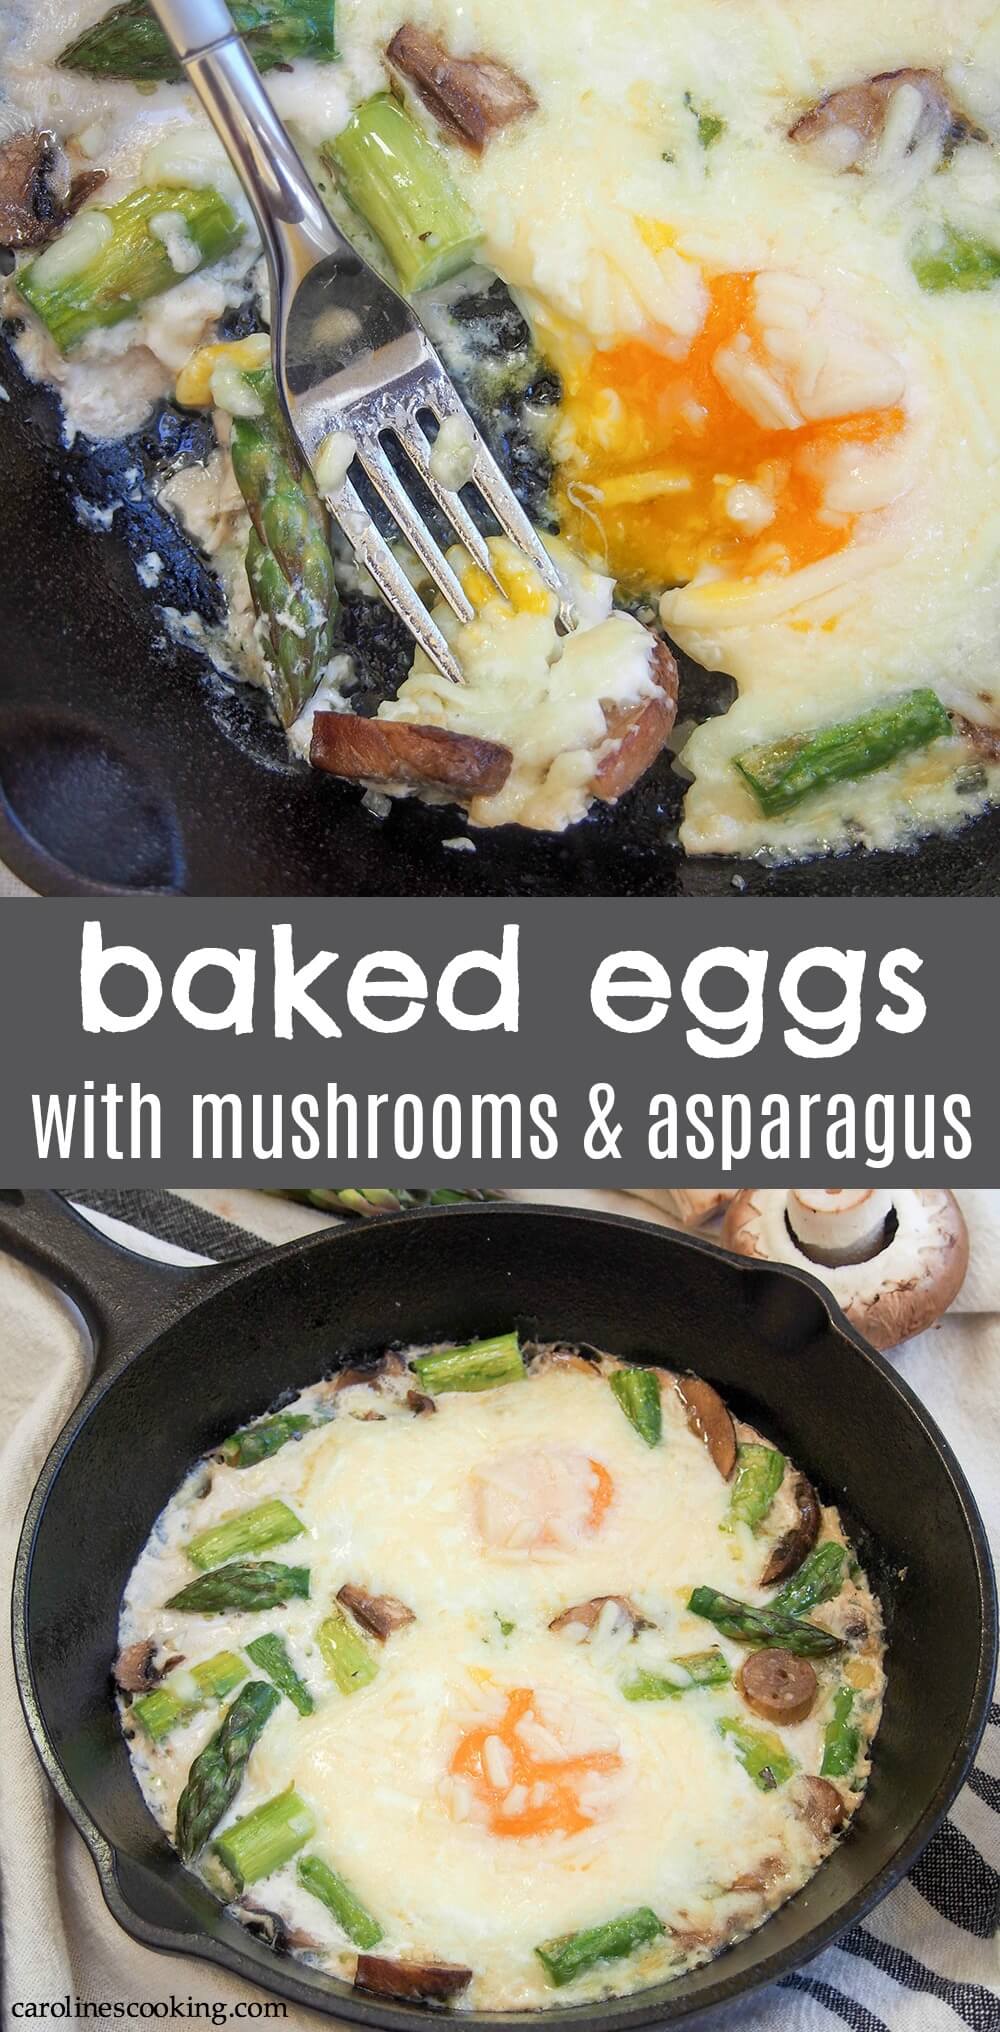 These baked eggs with mushrooms and asparagus are a deliciously comforting and easy one dish brunch.  With a tasty combination of earthy and fresh flavors, it's one you'll come back to again and again.  #brunchweek #ad #bakedeggs #brunch #breakfast #vegetarian #asparagus #mushroom